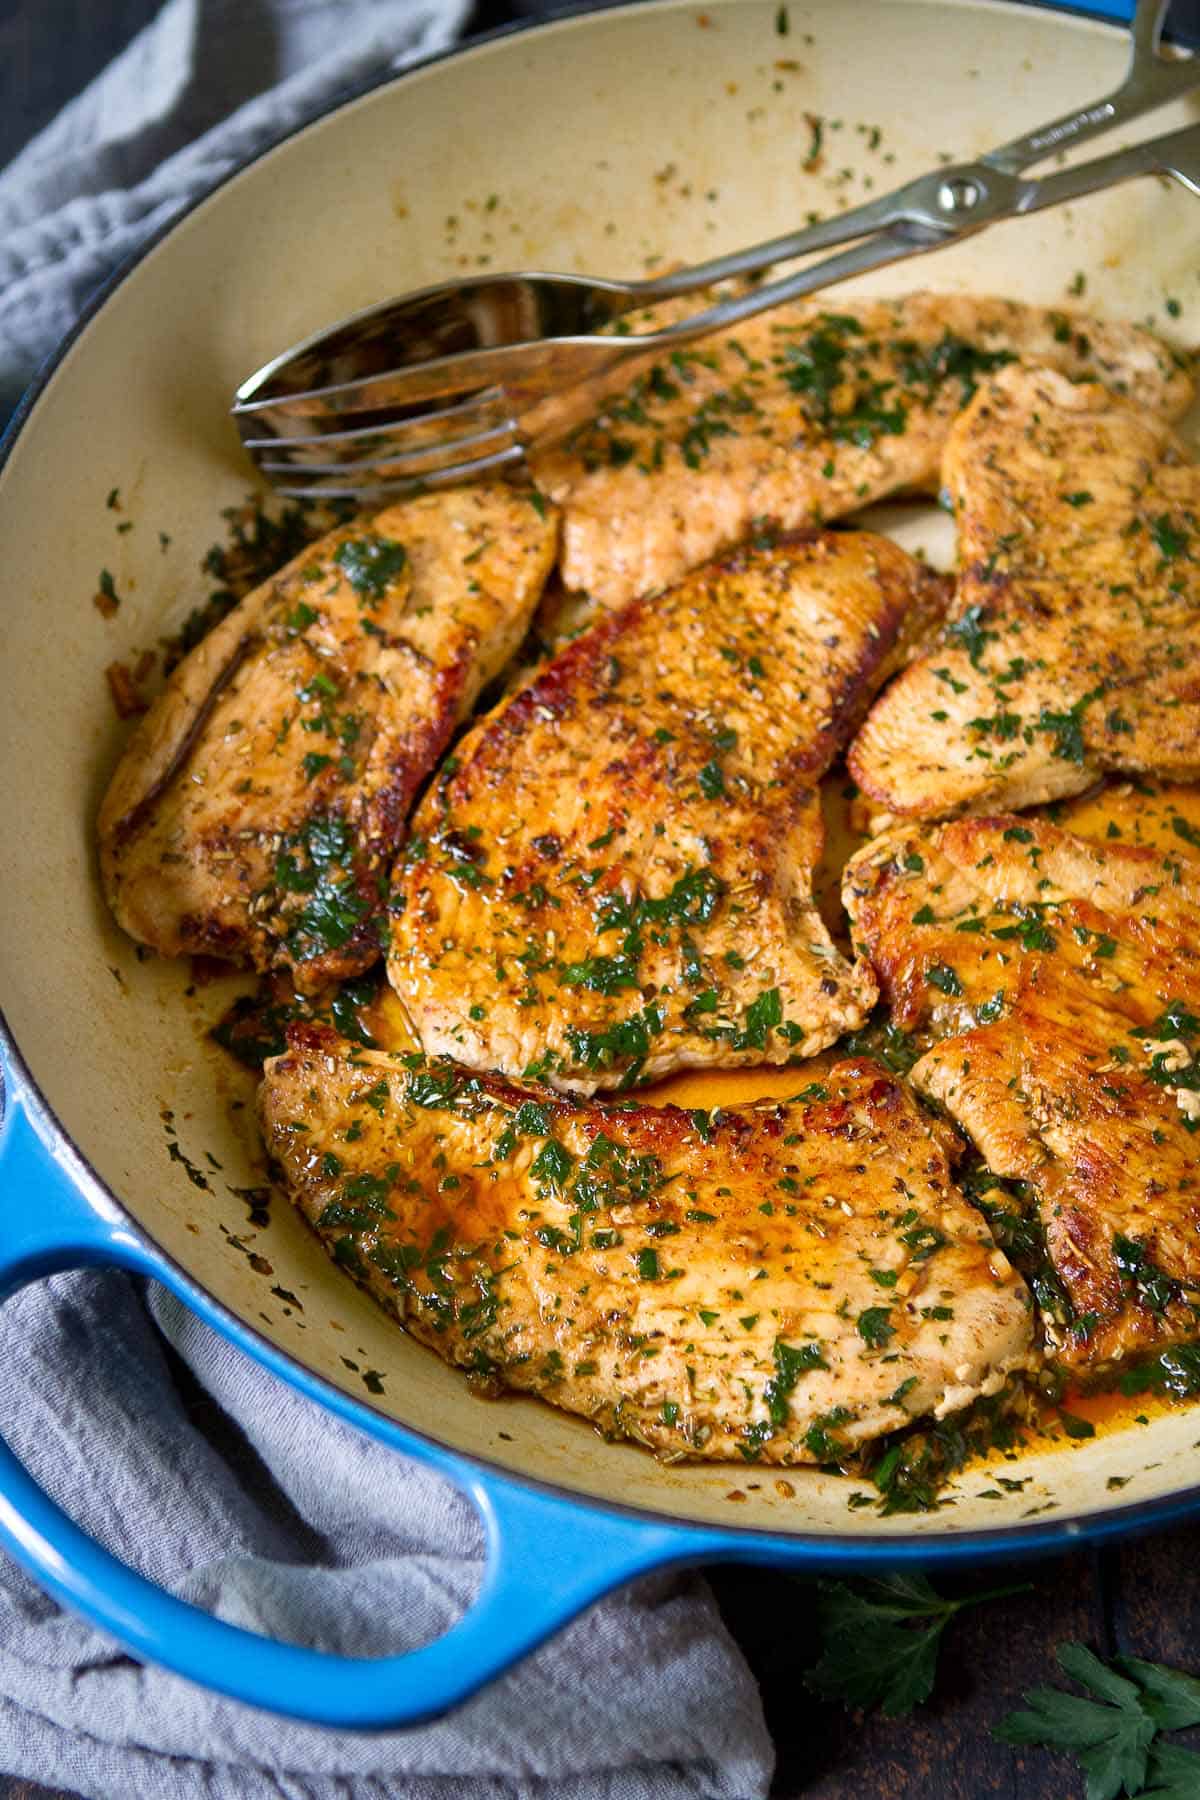 Cooked turkey breast fillets with wine sauce in blue skillet.